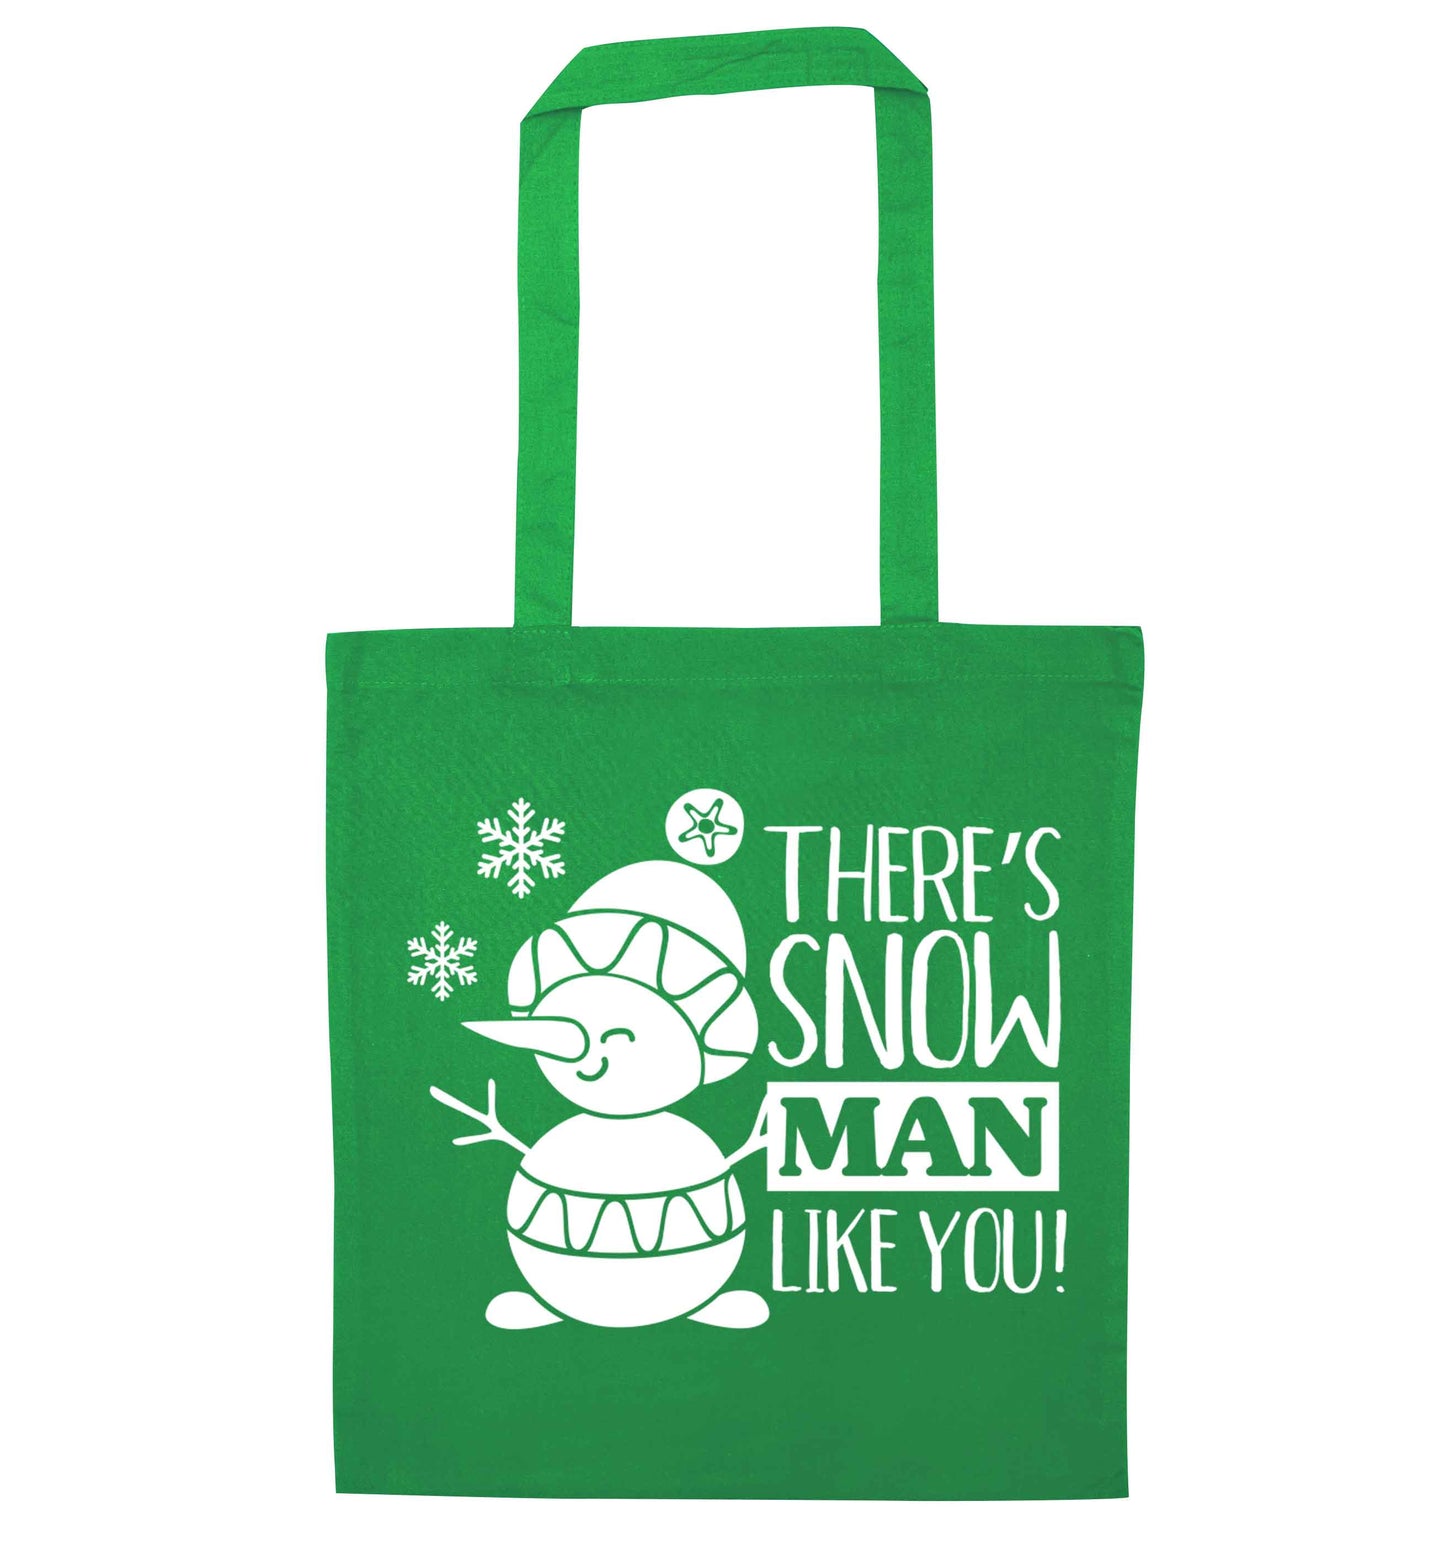 There's snow man like you green tote bag